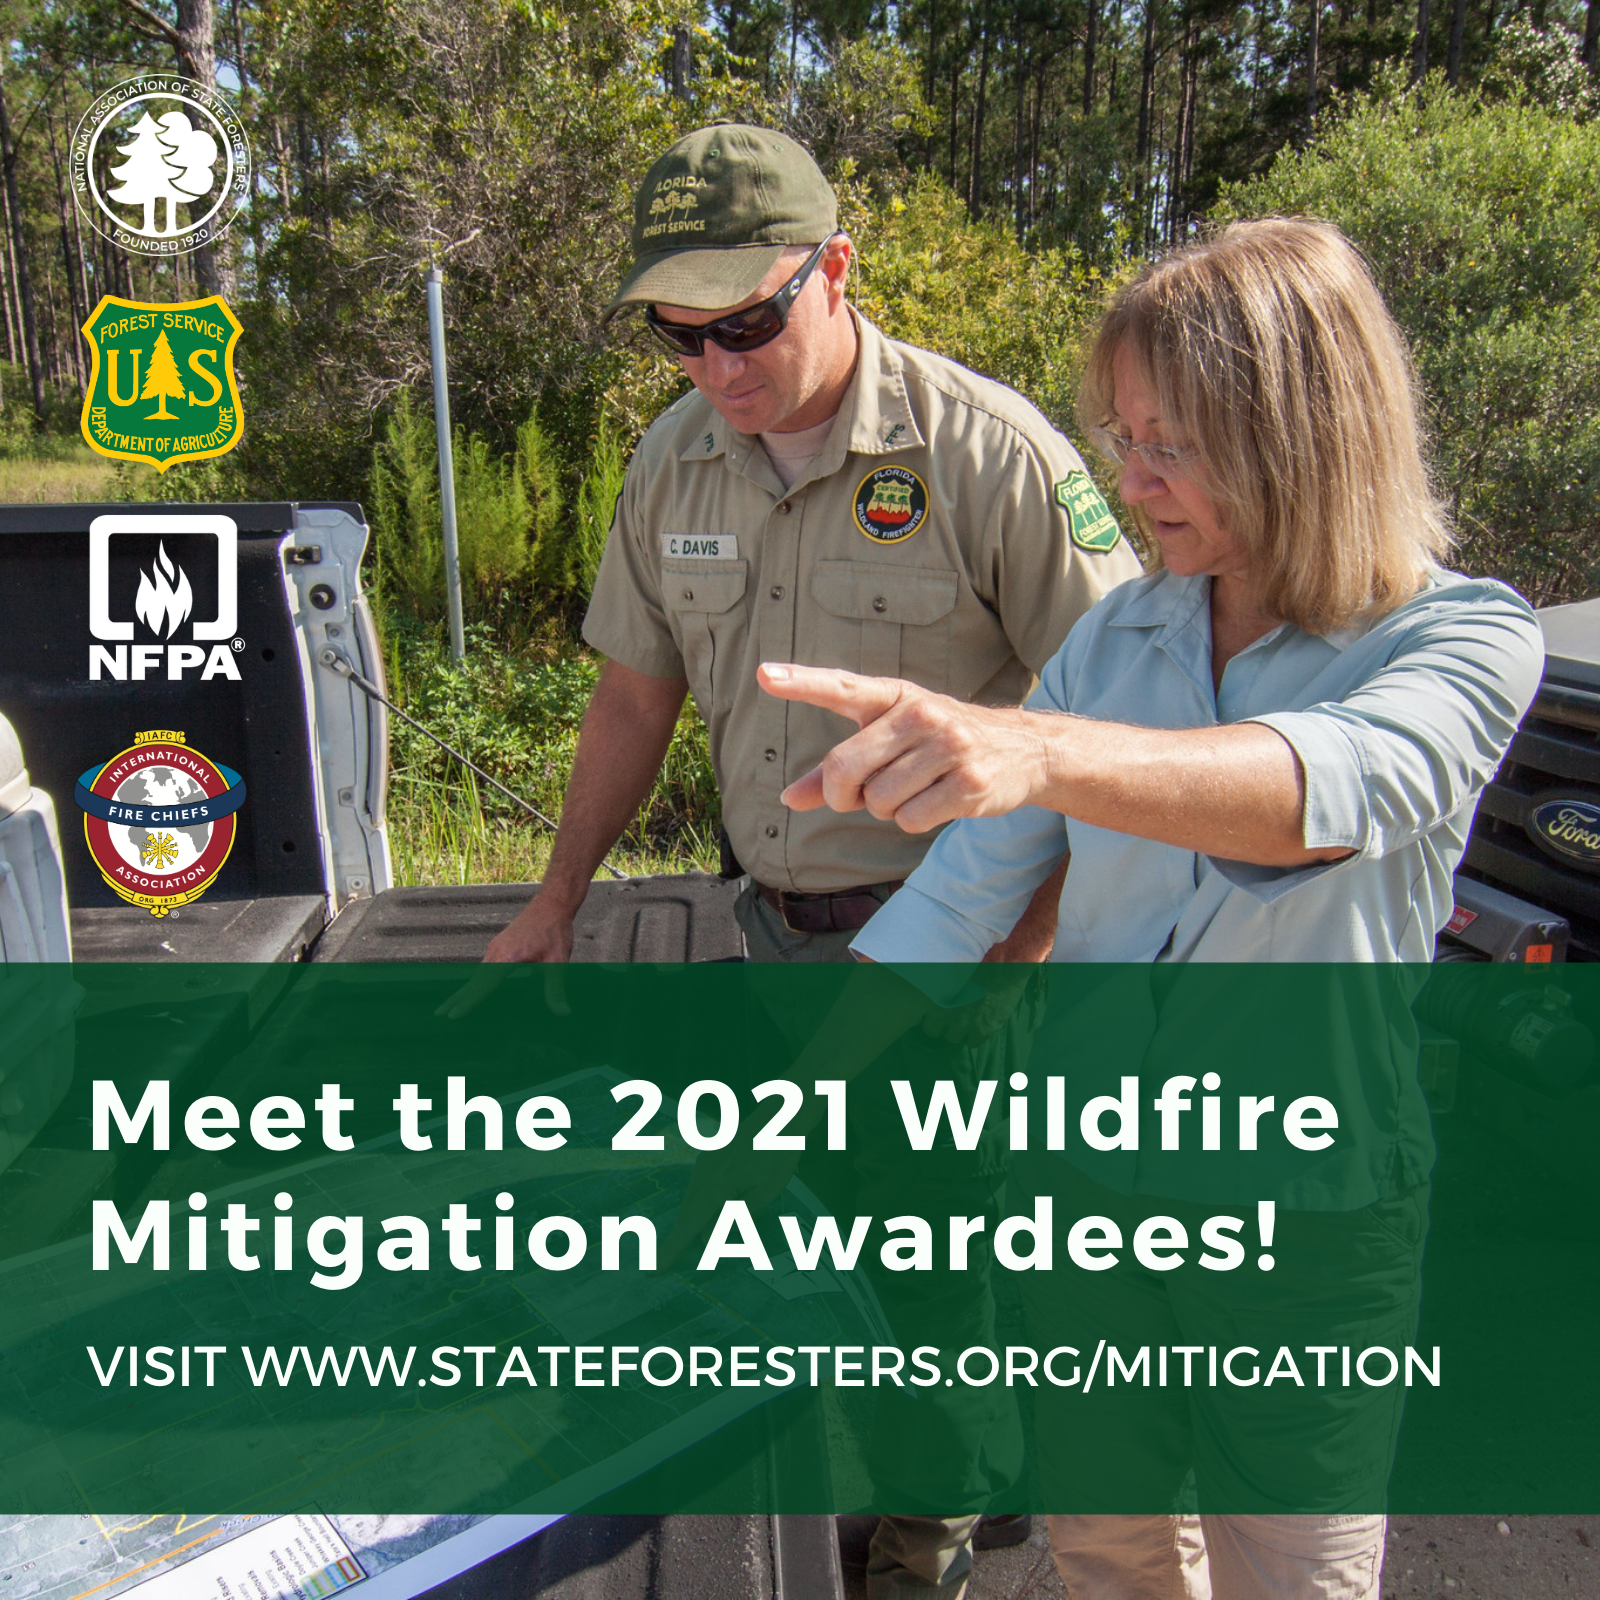 Meet the 2021 Wildfire Mitigation Awardees